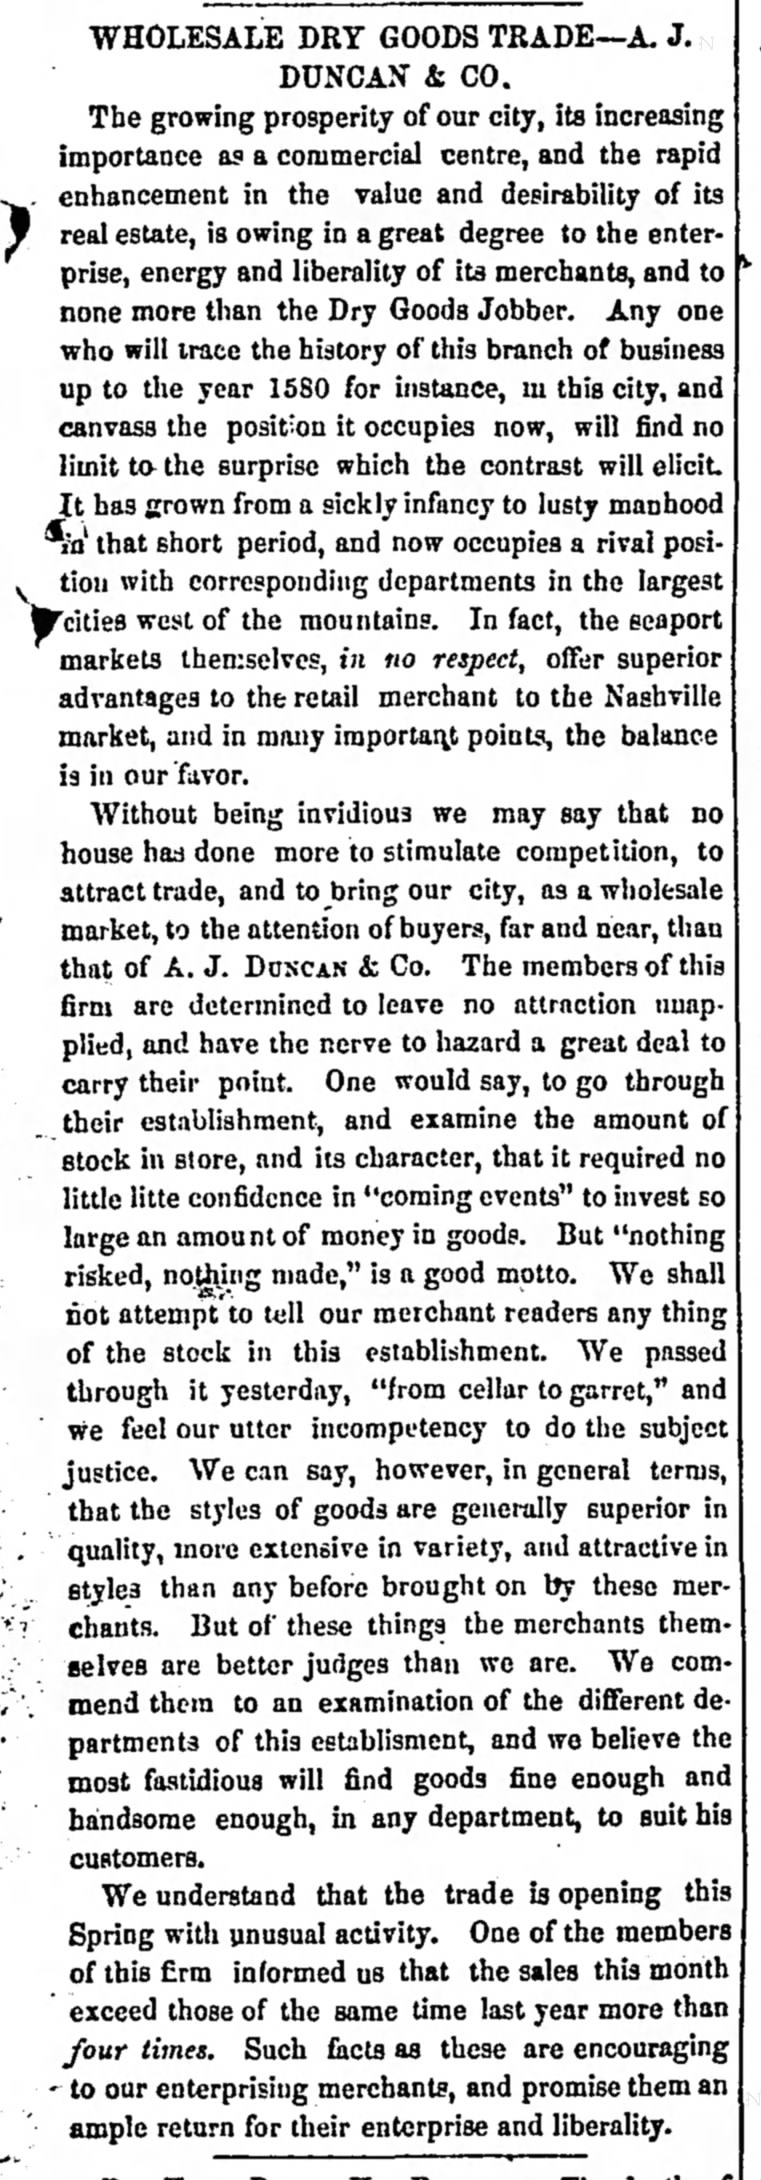 26 Feb 1857 Tennessean newspaper article about the A. J. Duncan & Co. Store.